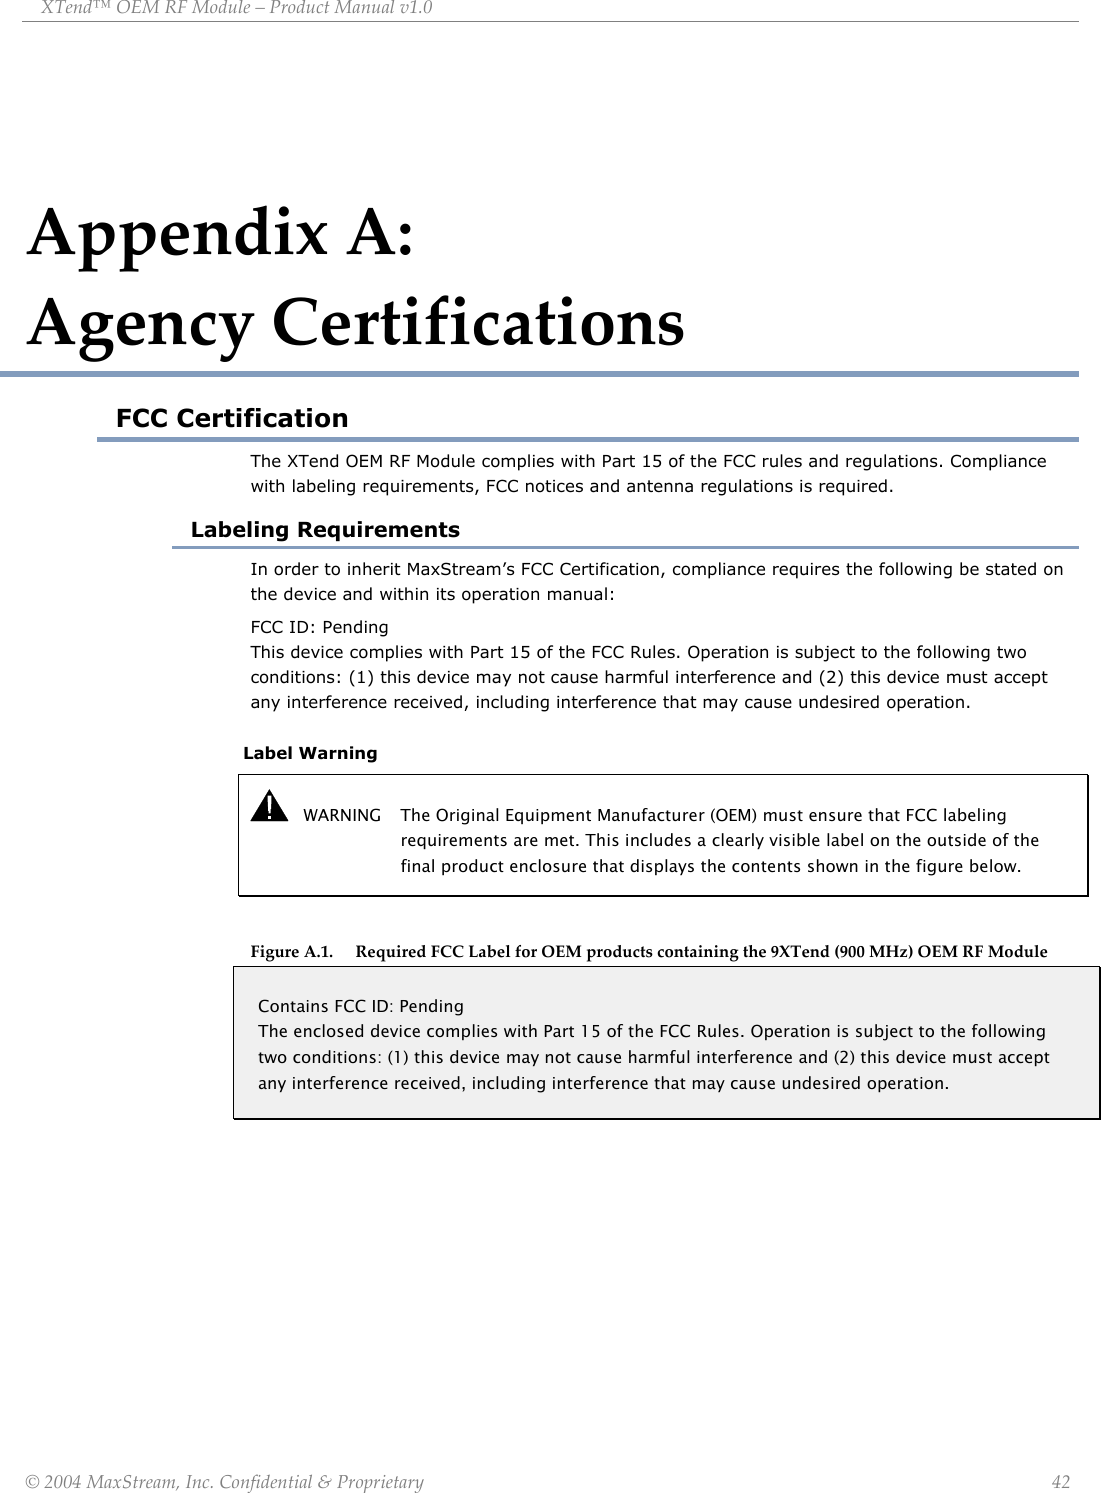 XTend™ OEM RF Module – Product Manual v1.0 Appendix A:                 Agency Certifications FCC Certification The XTend OEM RF Module complies with Part 15 of the FCC rules and regulations. Compliance with labeling requirements, FCC notices and antenna regulations is required. Labeling Requirements In order to inherit MaxStream’s FCC Certification, compliance requires the following be stated on the device and within its operation manual: FCC ID: Pending                                                                                                                This device complies with Part 15 of the FCC Rules. Operation is subject to the following two conditions: (1) this device may not cause harmful interference and (2) this device must accept any interference received, including interference that may cause undesired operation.   Label Warning    WARNING  The Original Equipment Manufacturer (OEM) must ensure that FCC labeling requirements are met. This includes a clearly visible label on the outside of the final product enclosure that displays the contents shown in the figure below.  Figure A.1. Required FCC Label for OEM products containing the 9XTend (900 MHz) OEM RF Module Contains FCC ID: Pending The enclosed device complies with Part 15 of the FCC Rules. Operation is subject to the following two conditions: (1) this device may not cause harmful interference and (2) this device must accept any interference received, including interference that may cause undesired operation.   © 2004 MaxStream, Inc. Confidential &amp; Proprietary                 42 